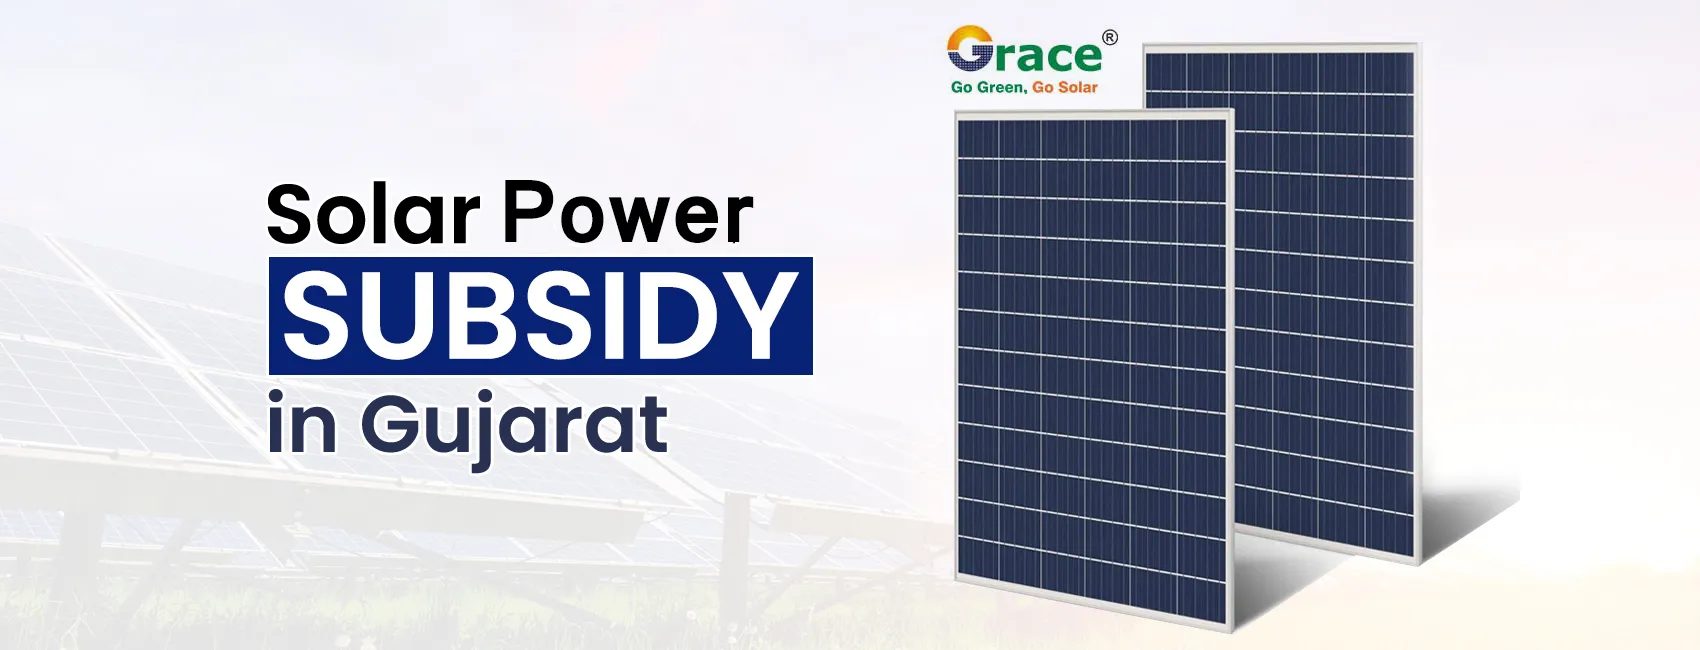 Subsidy for Solar Power Plant in Gujarat